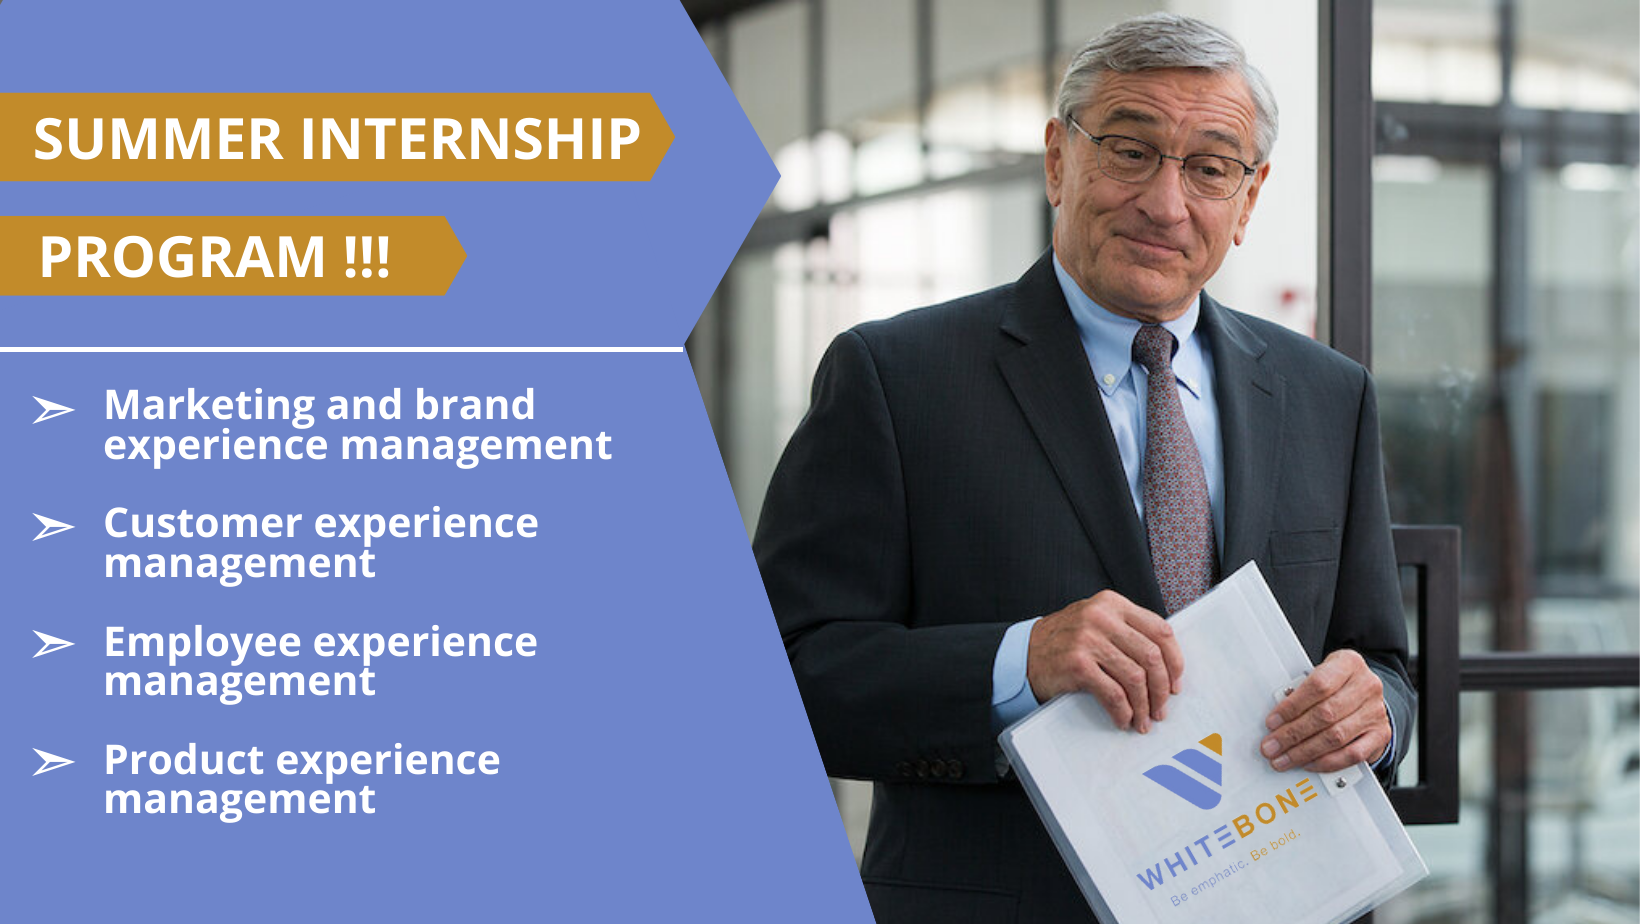 You are currently viewing Whitebone | Summer internship program 2022<br><br>